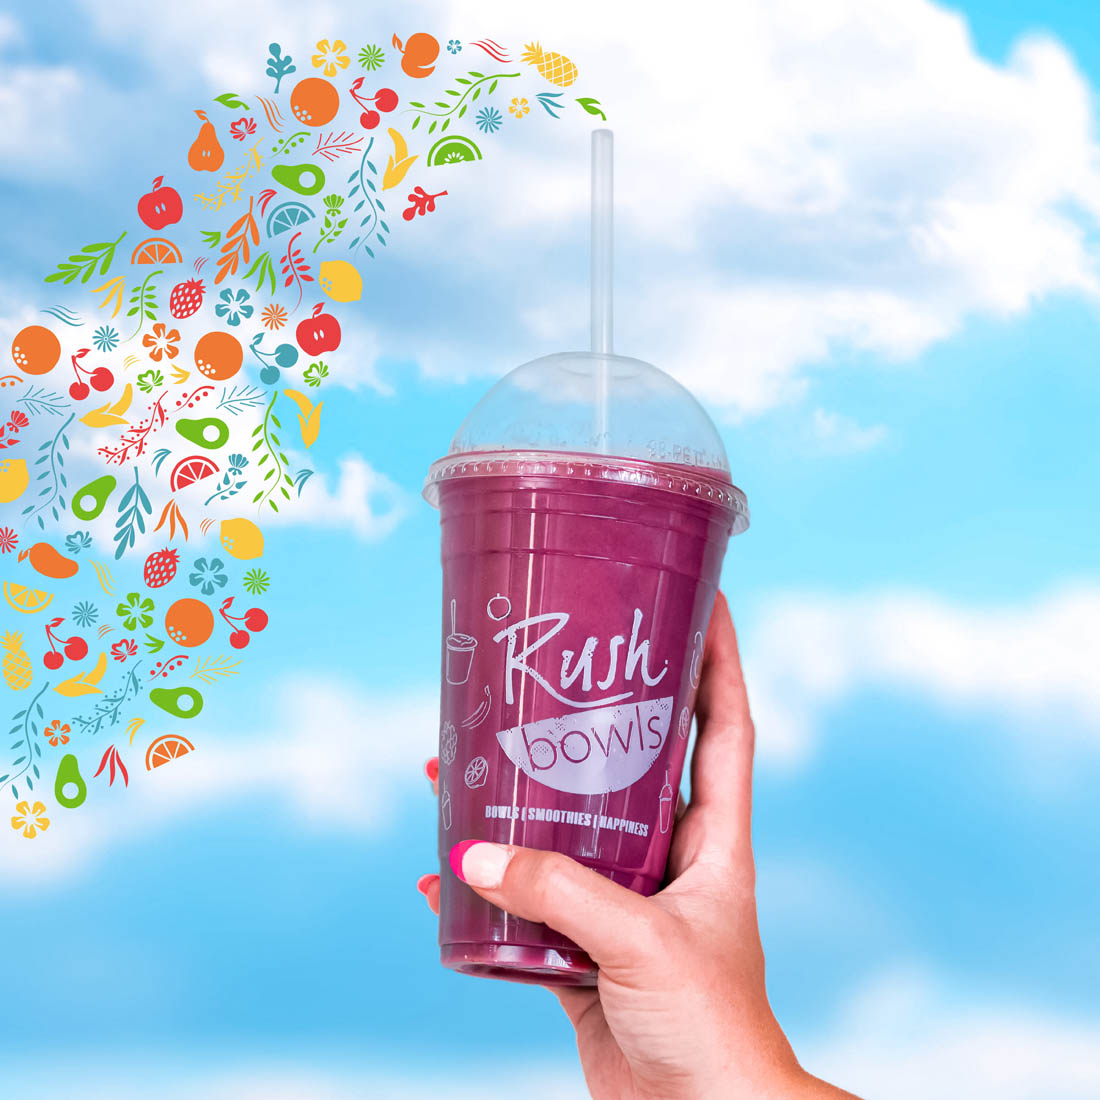 Rush Bowls smoothies bowls nutrition info in your local area are fully customizable.